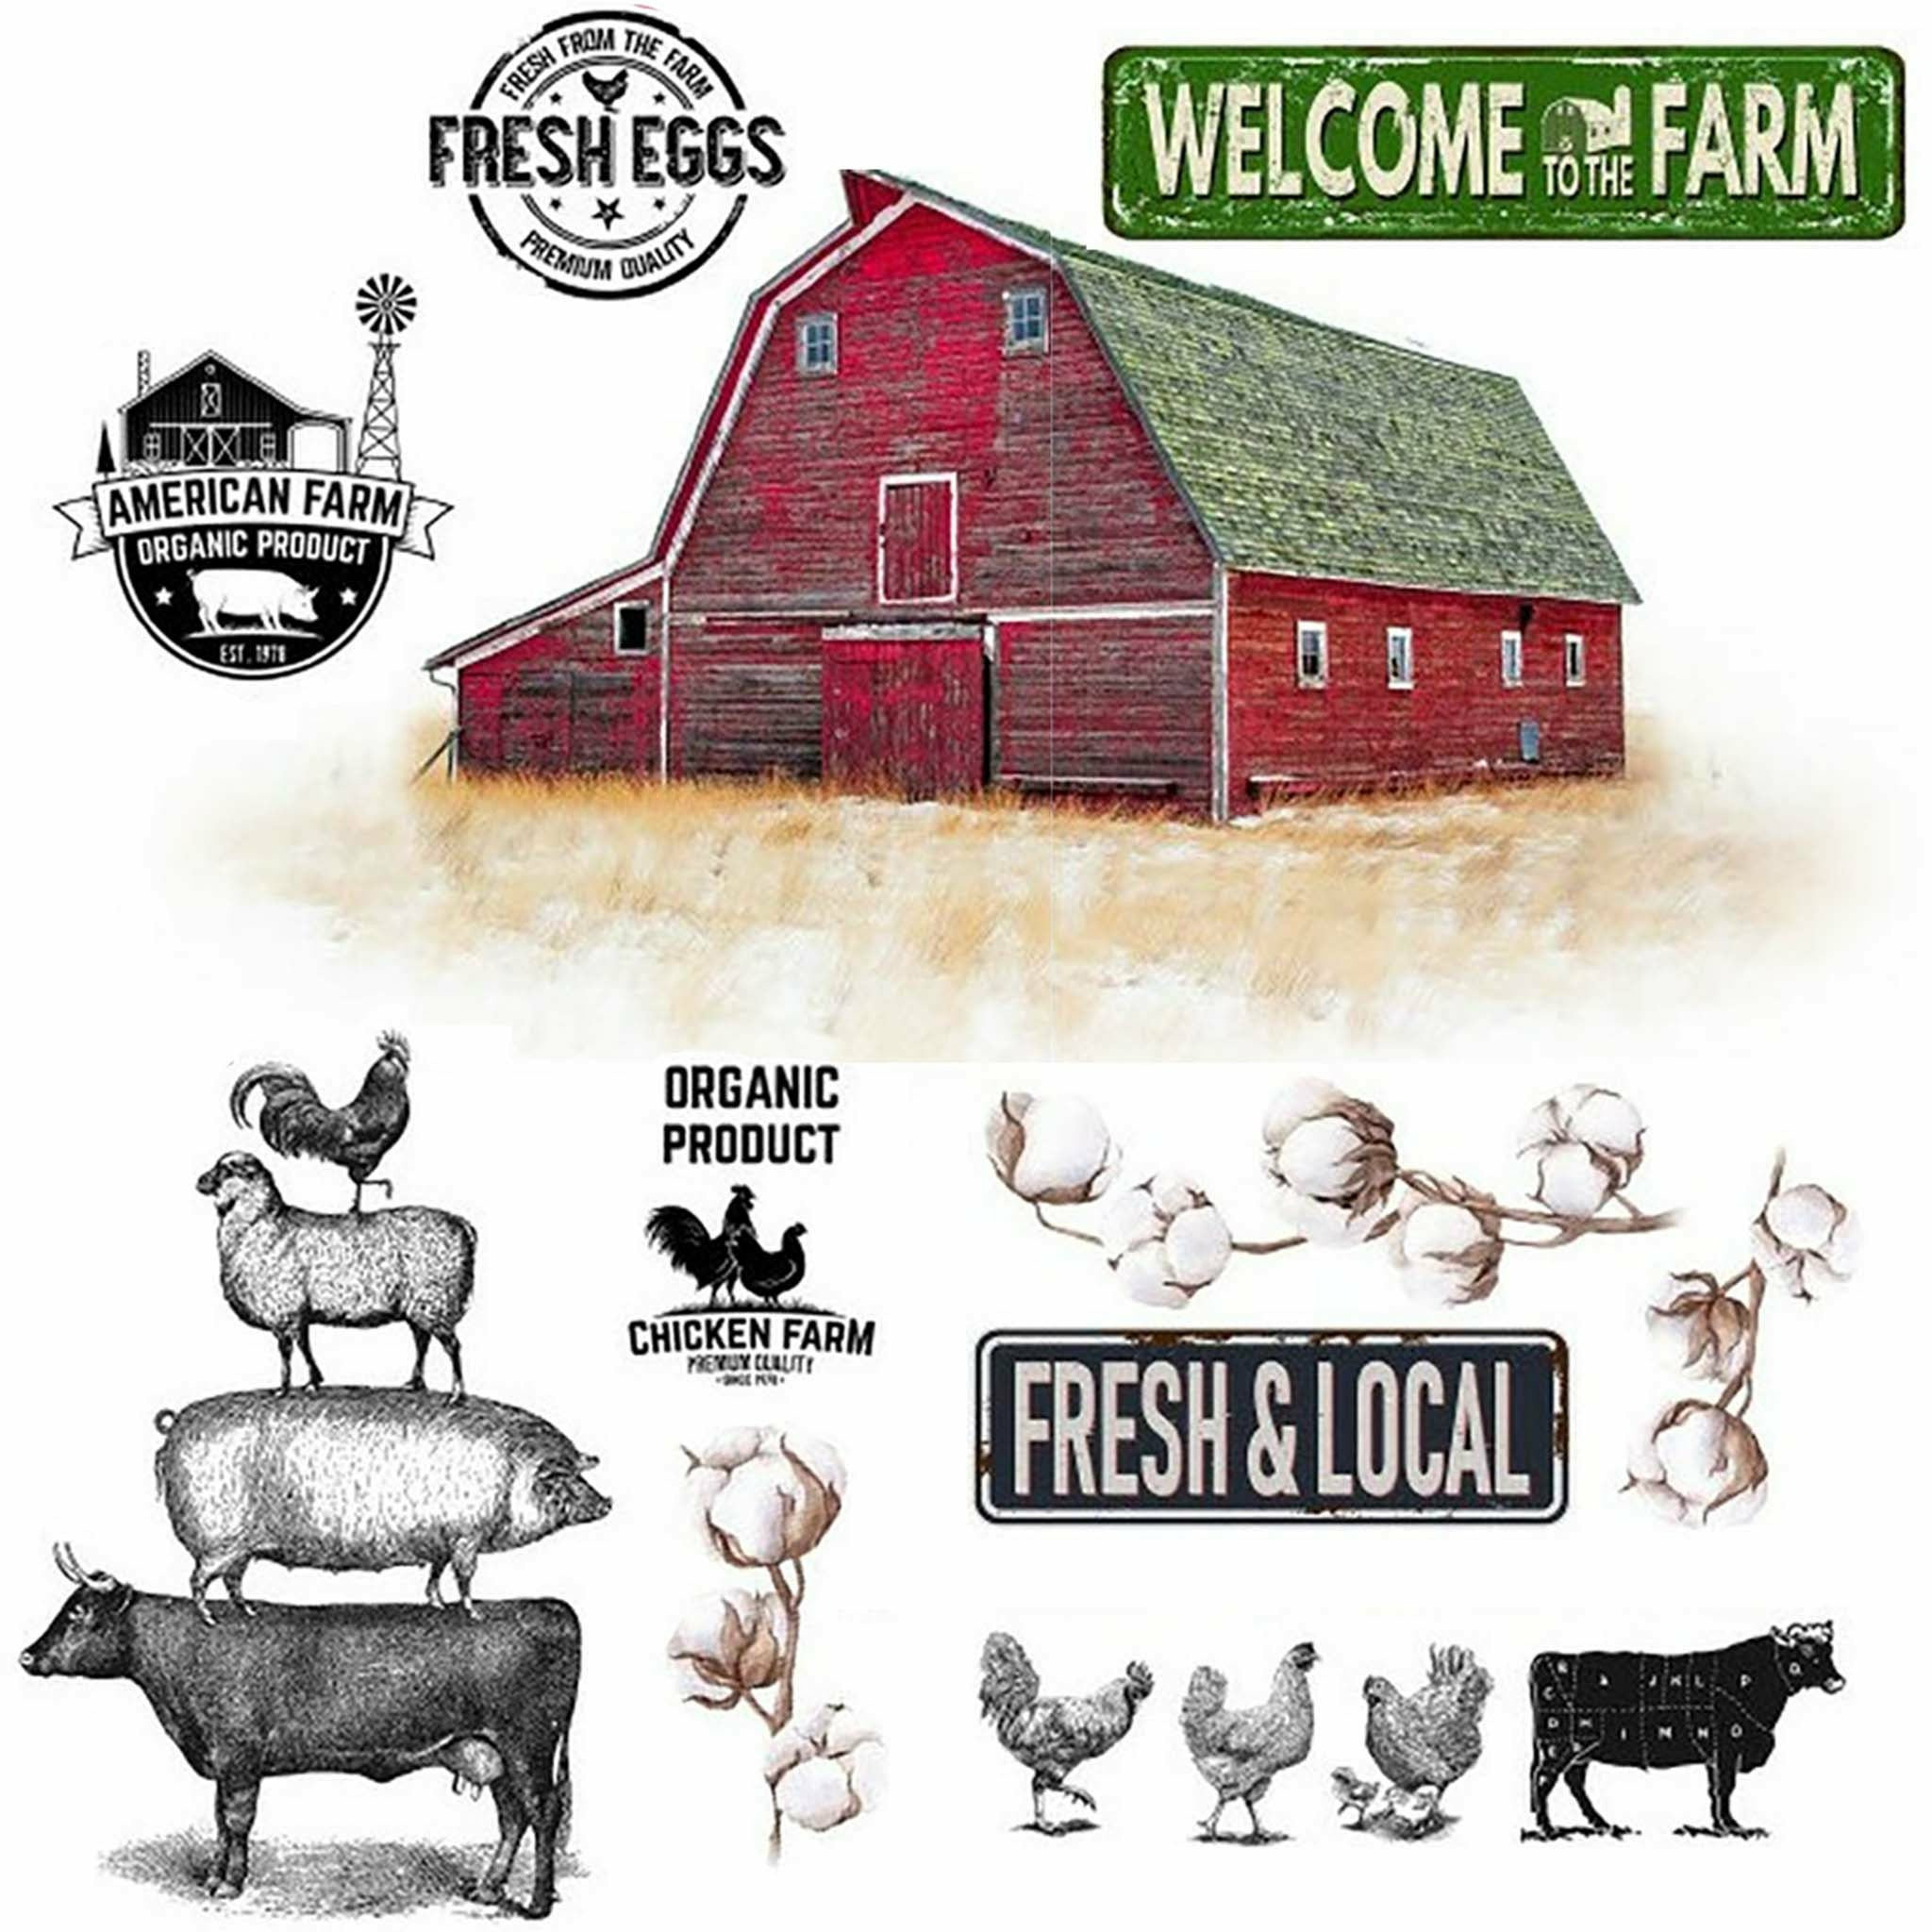 Close-up of a rub-on transfer that features a large red farm barn, farm signs, cotton plants, and drawings of farm animals.